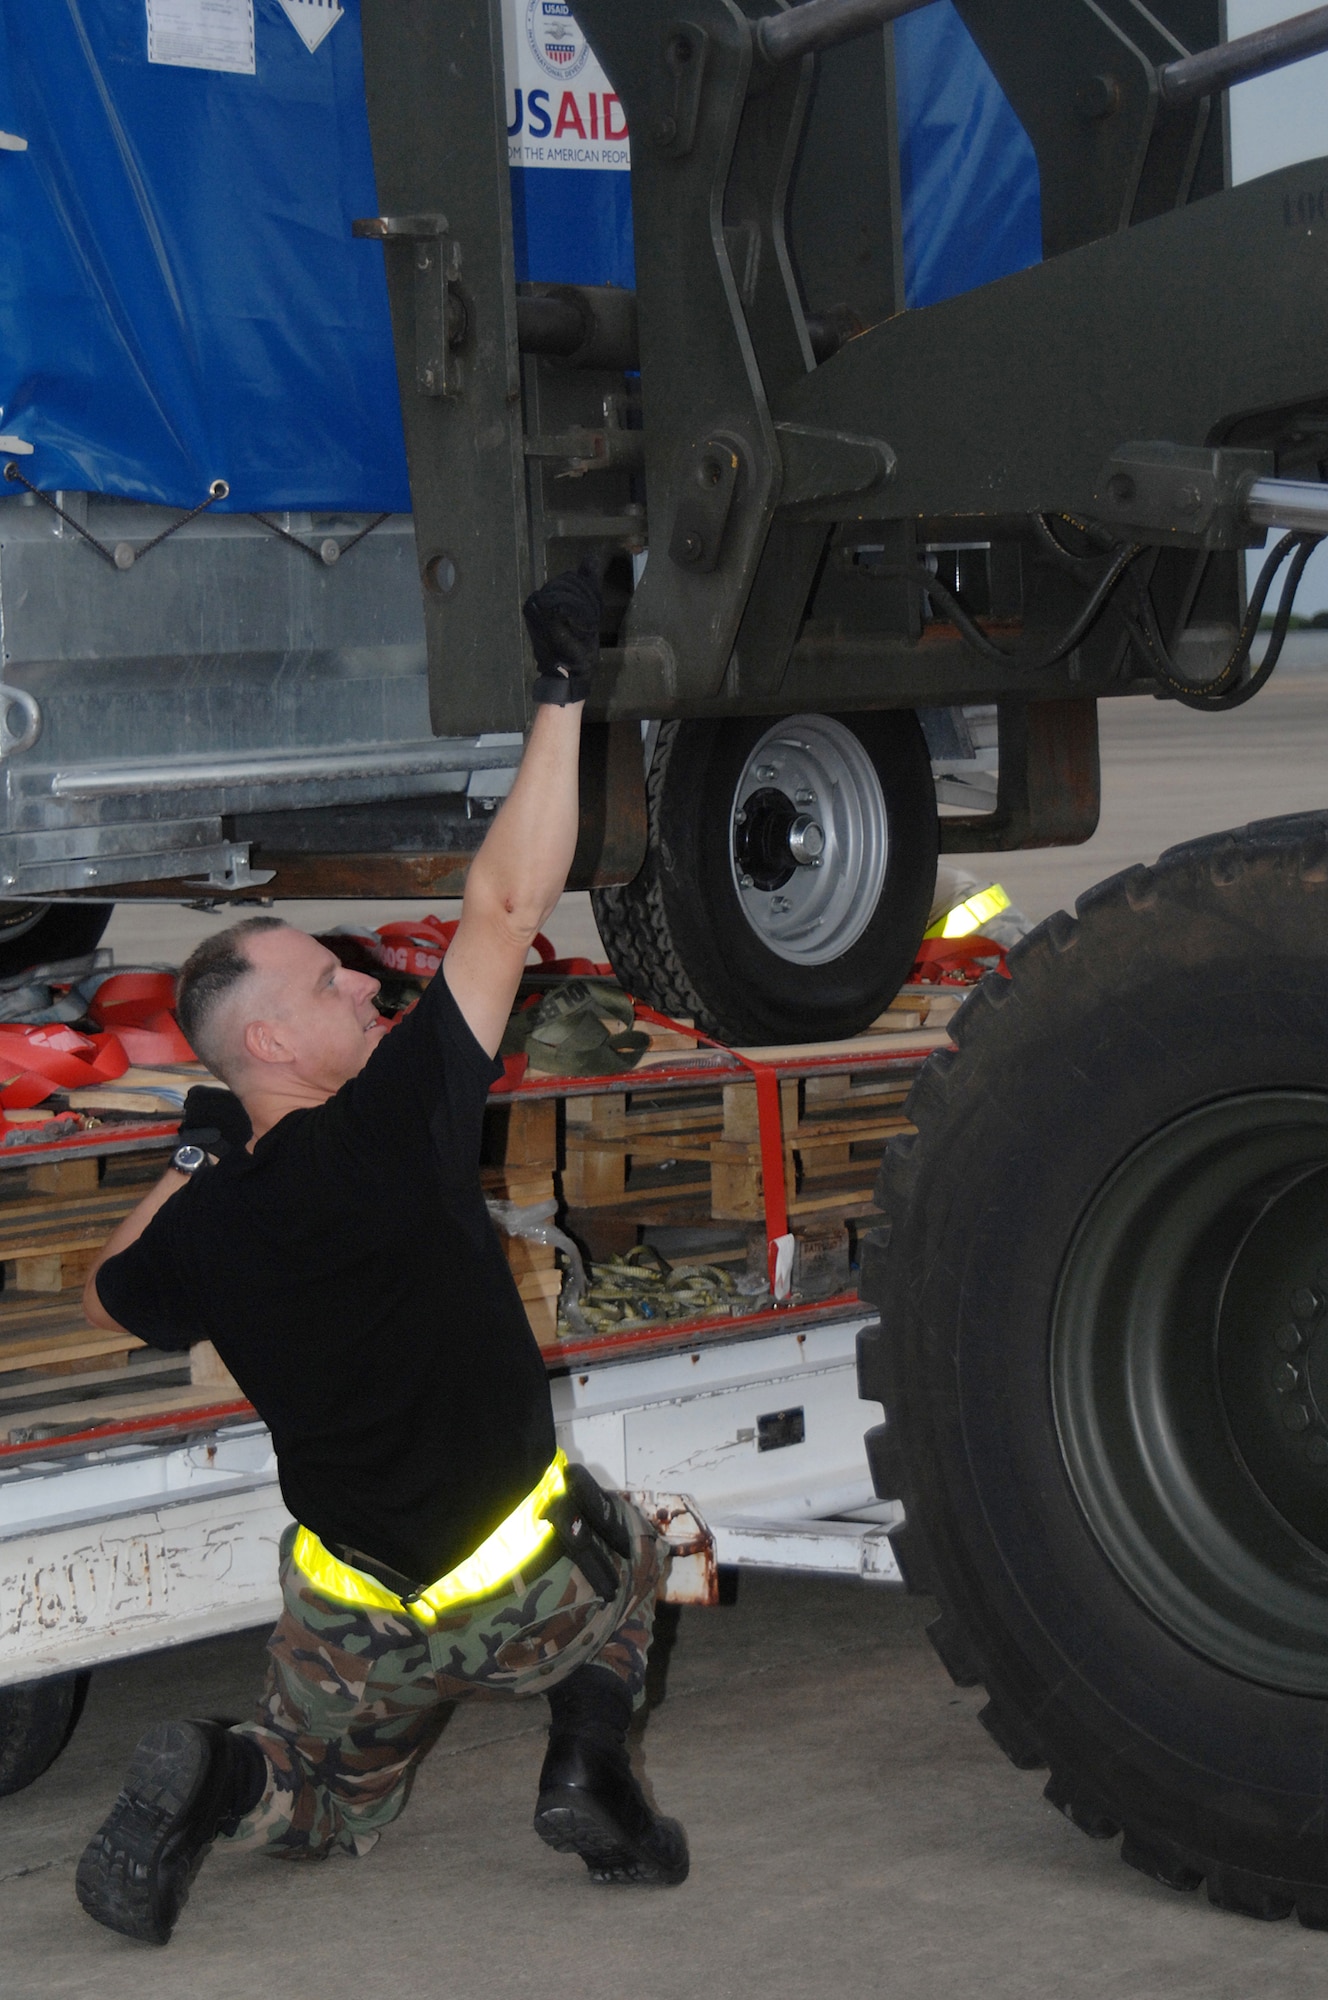 Utapao, Thailand - Technical Sgt John Kortez, 36th Contingency Response Squadron from Andersen AFB, Guam directs the placement of a forklift for the transfer of humanitarian relief supplies being downloaded from a Boeing 747 commercial airplane for delivery into Burma May 16. (USAF photo/Senior Airman Sonya Croston)(RELEASED)